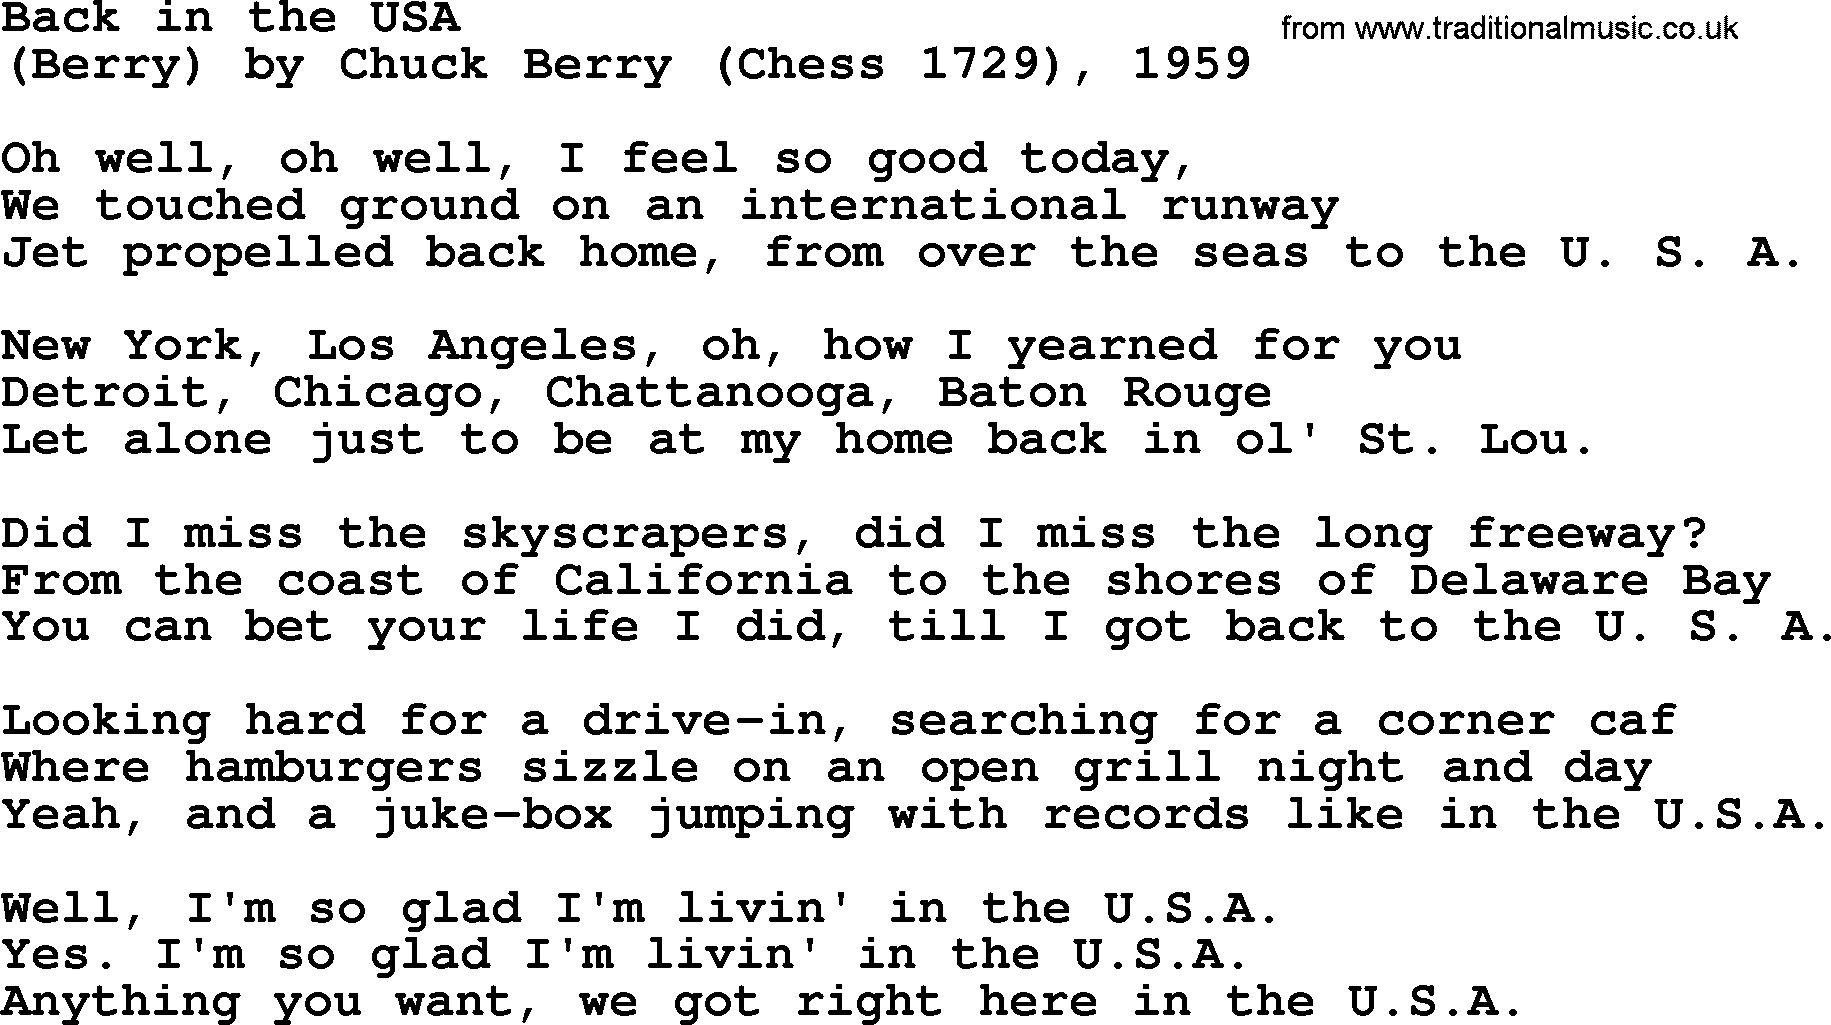 Bruce Springsteen song: Back In The Usa lyrics